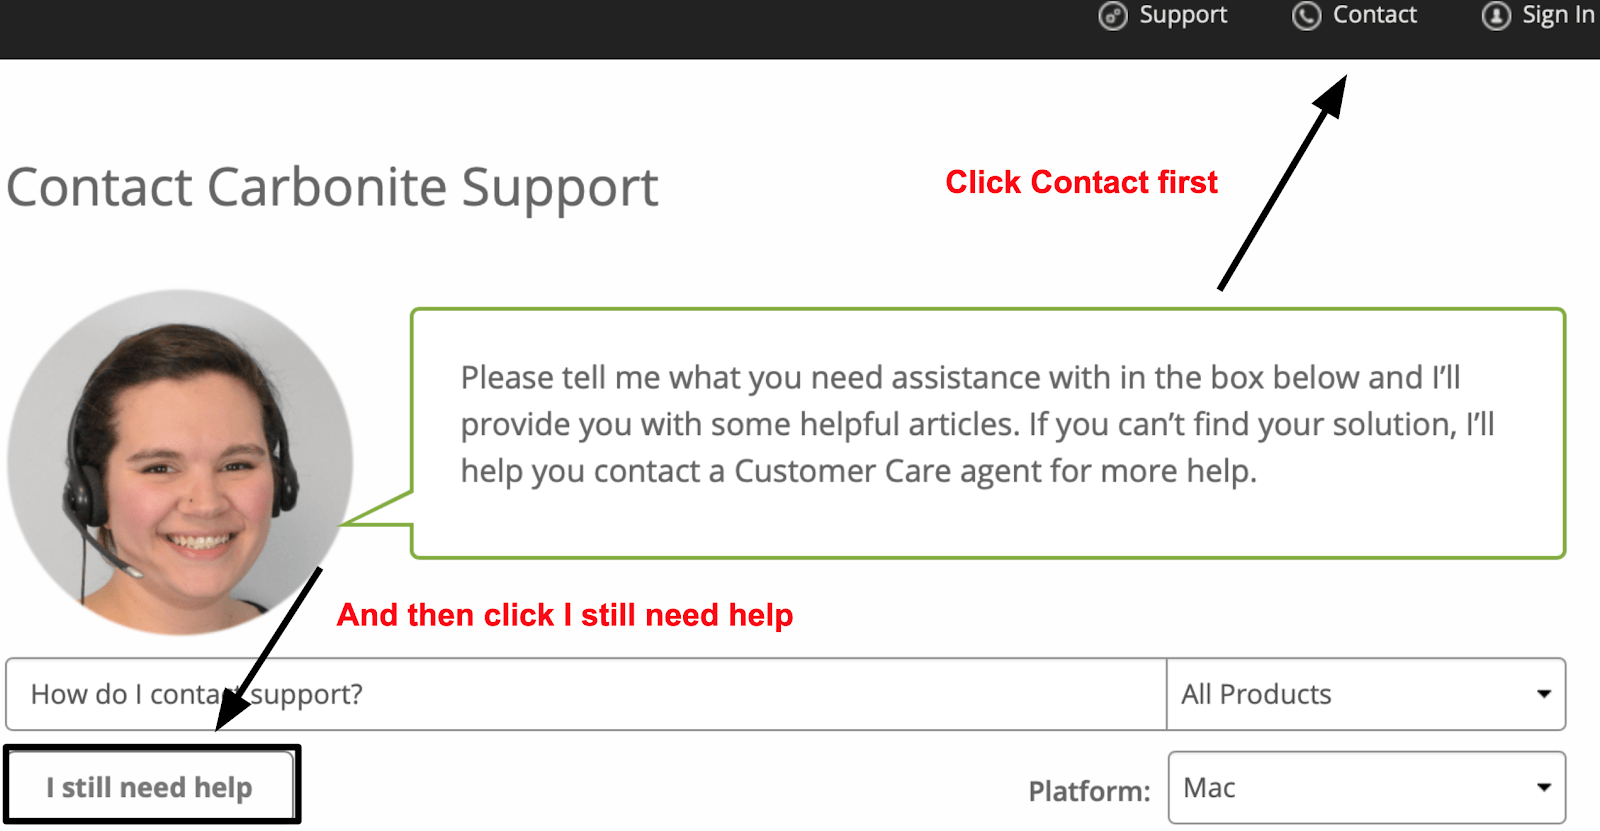 Steps for contacting Carbonite support